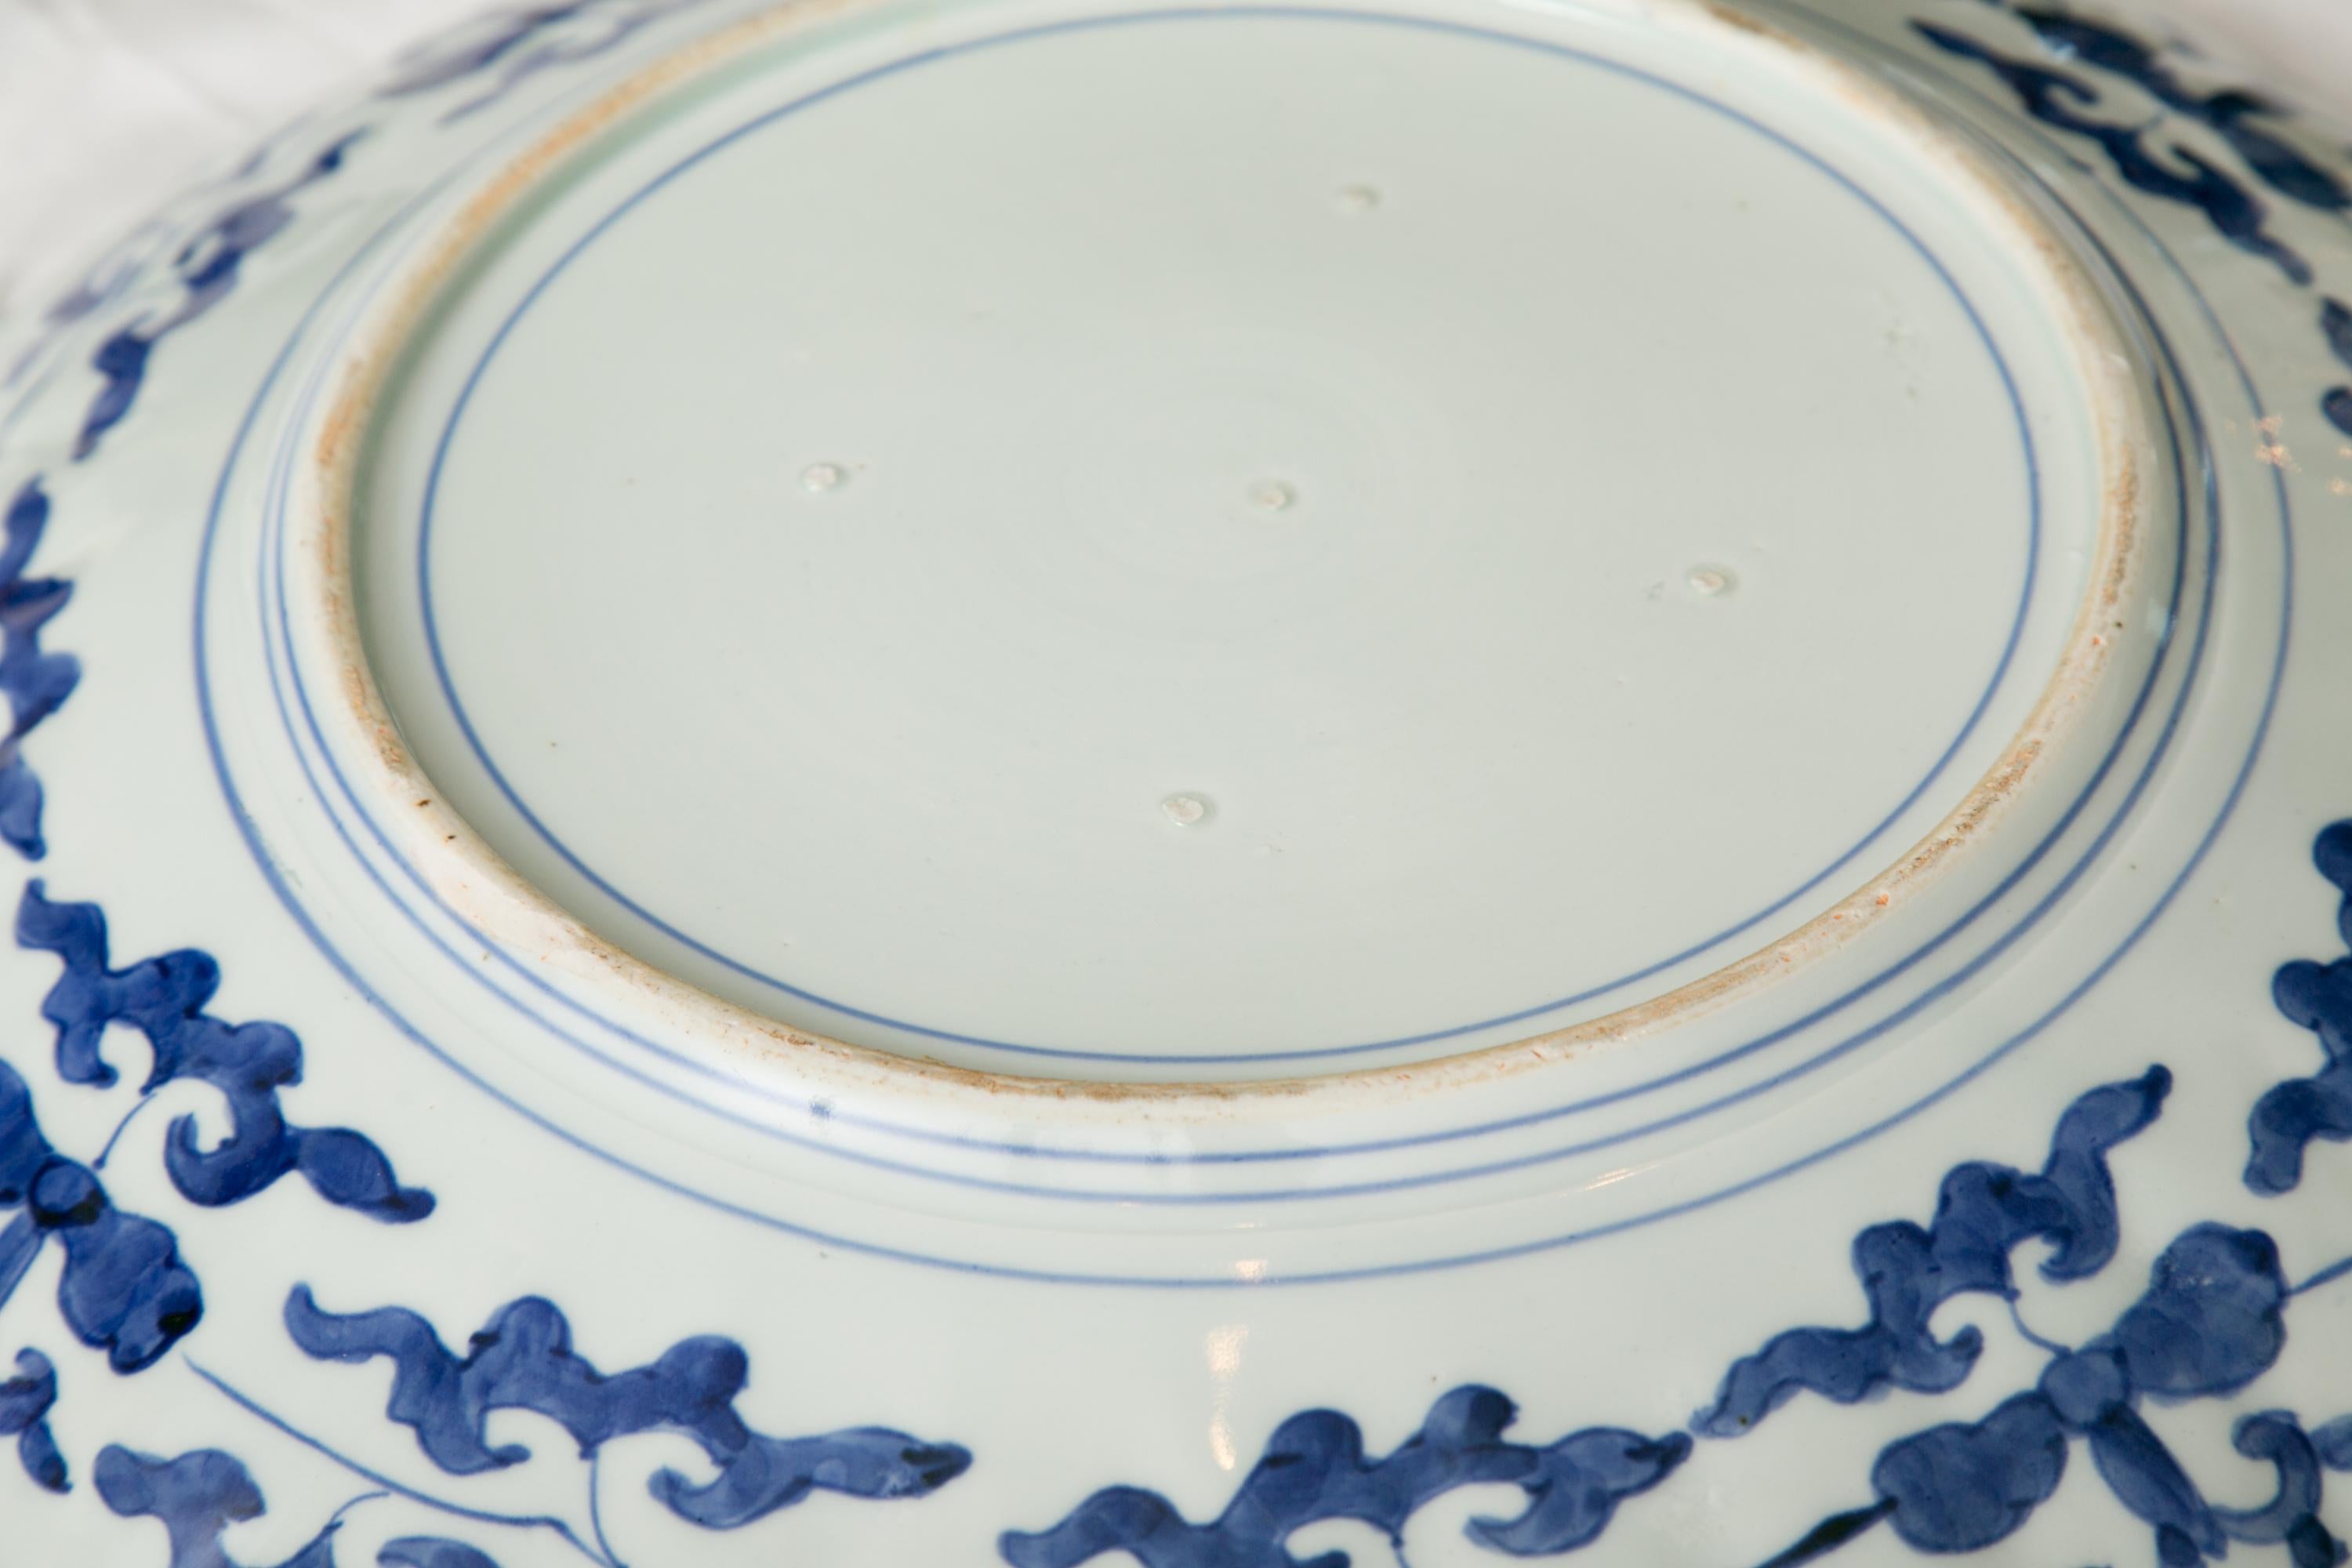 This is a classic Imari charger with scalloped edge and exhibiting bold colors of cobalt blue and bittersweet, with underglazed blue markings around perimeter of bottom, circa late 19th century.